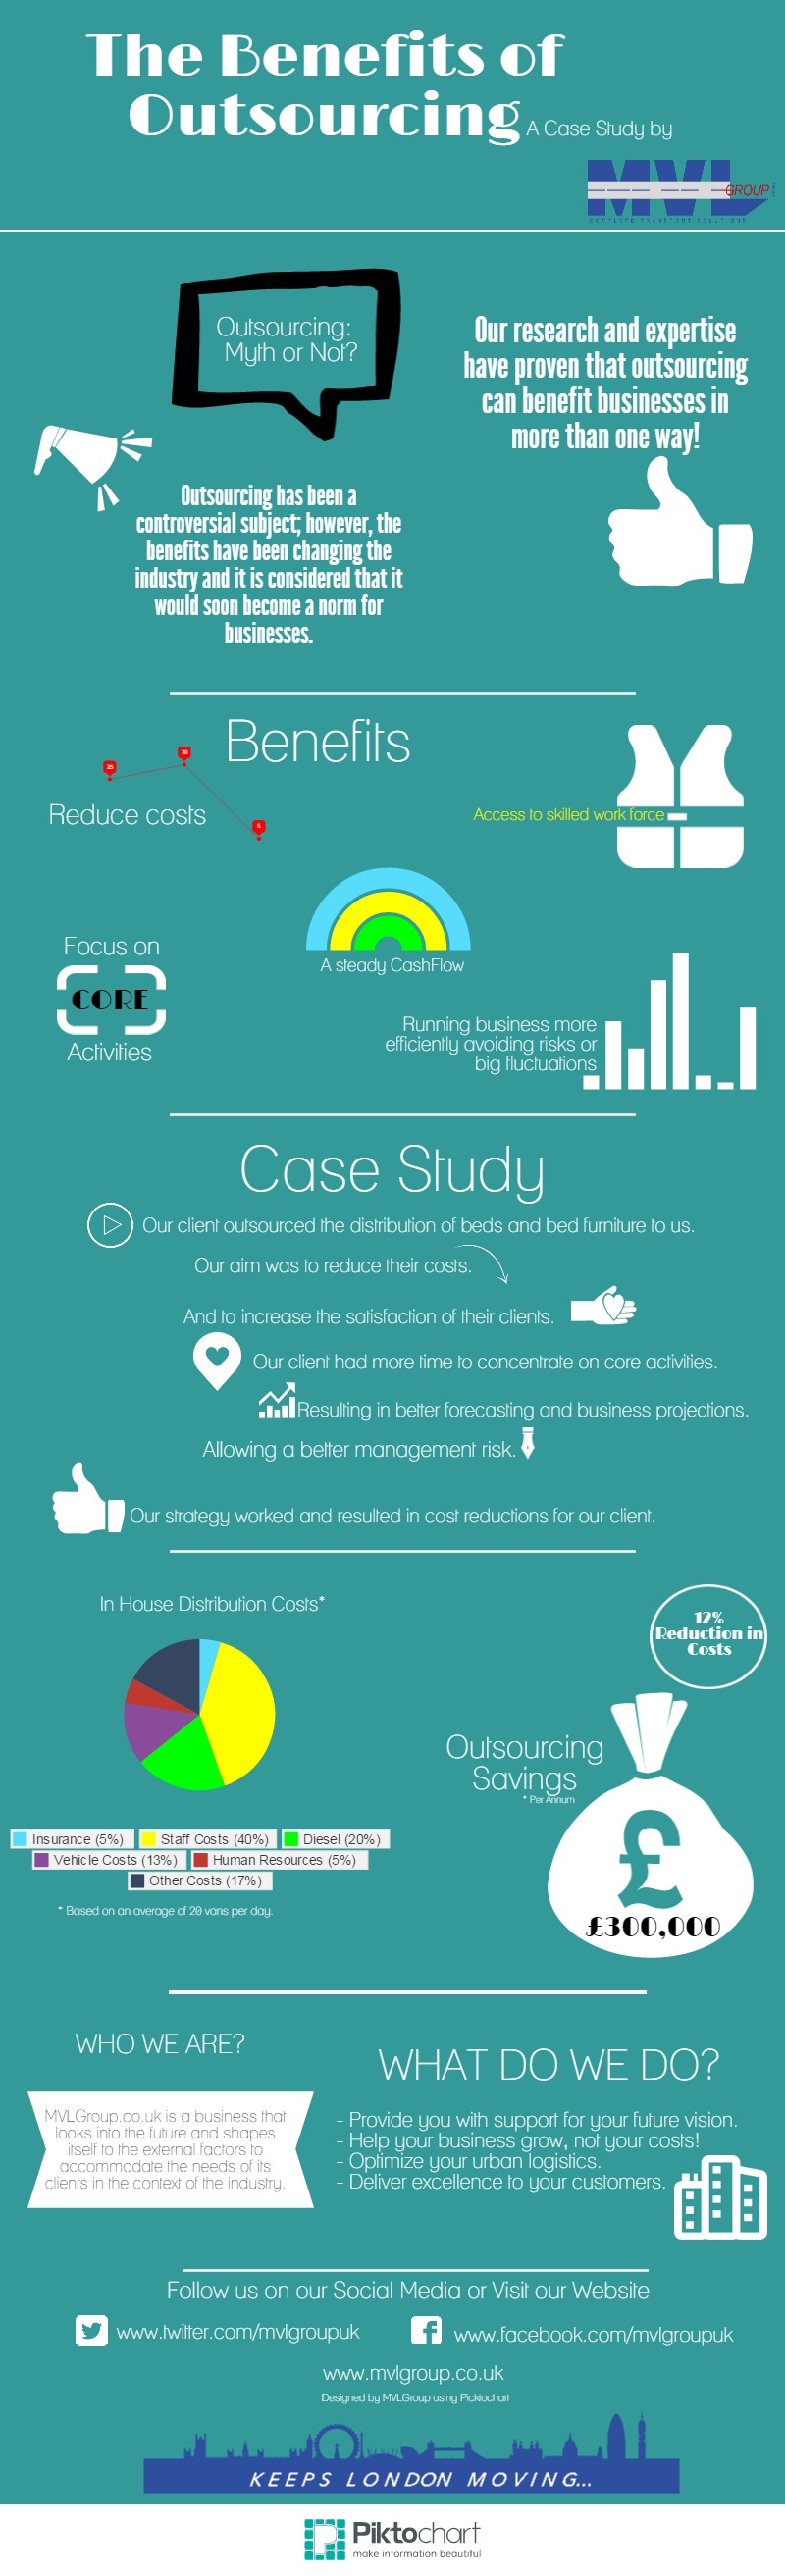 MVLGroup Case Study Outsourcing